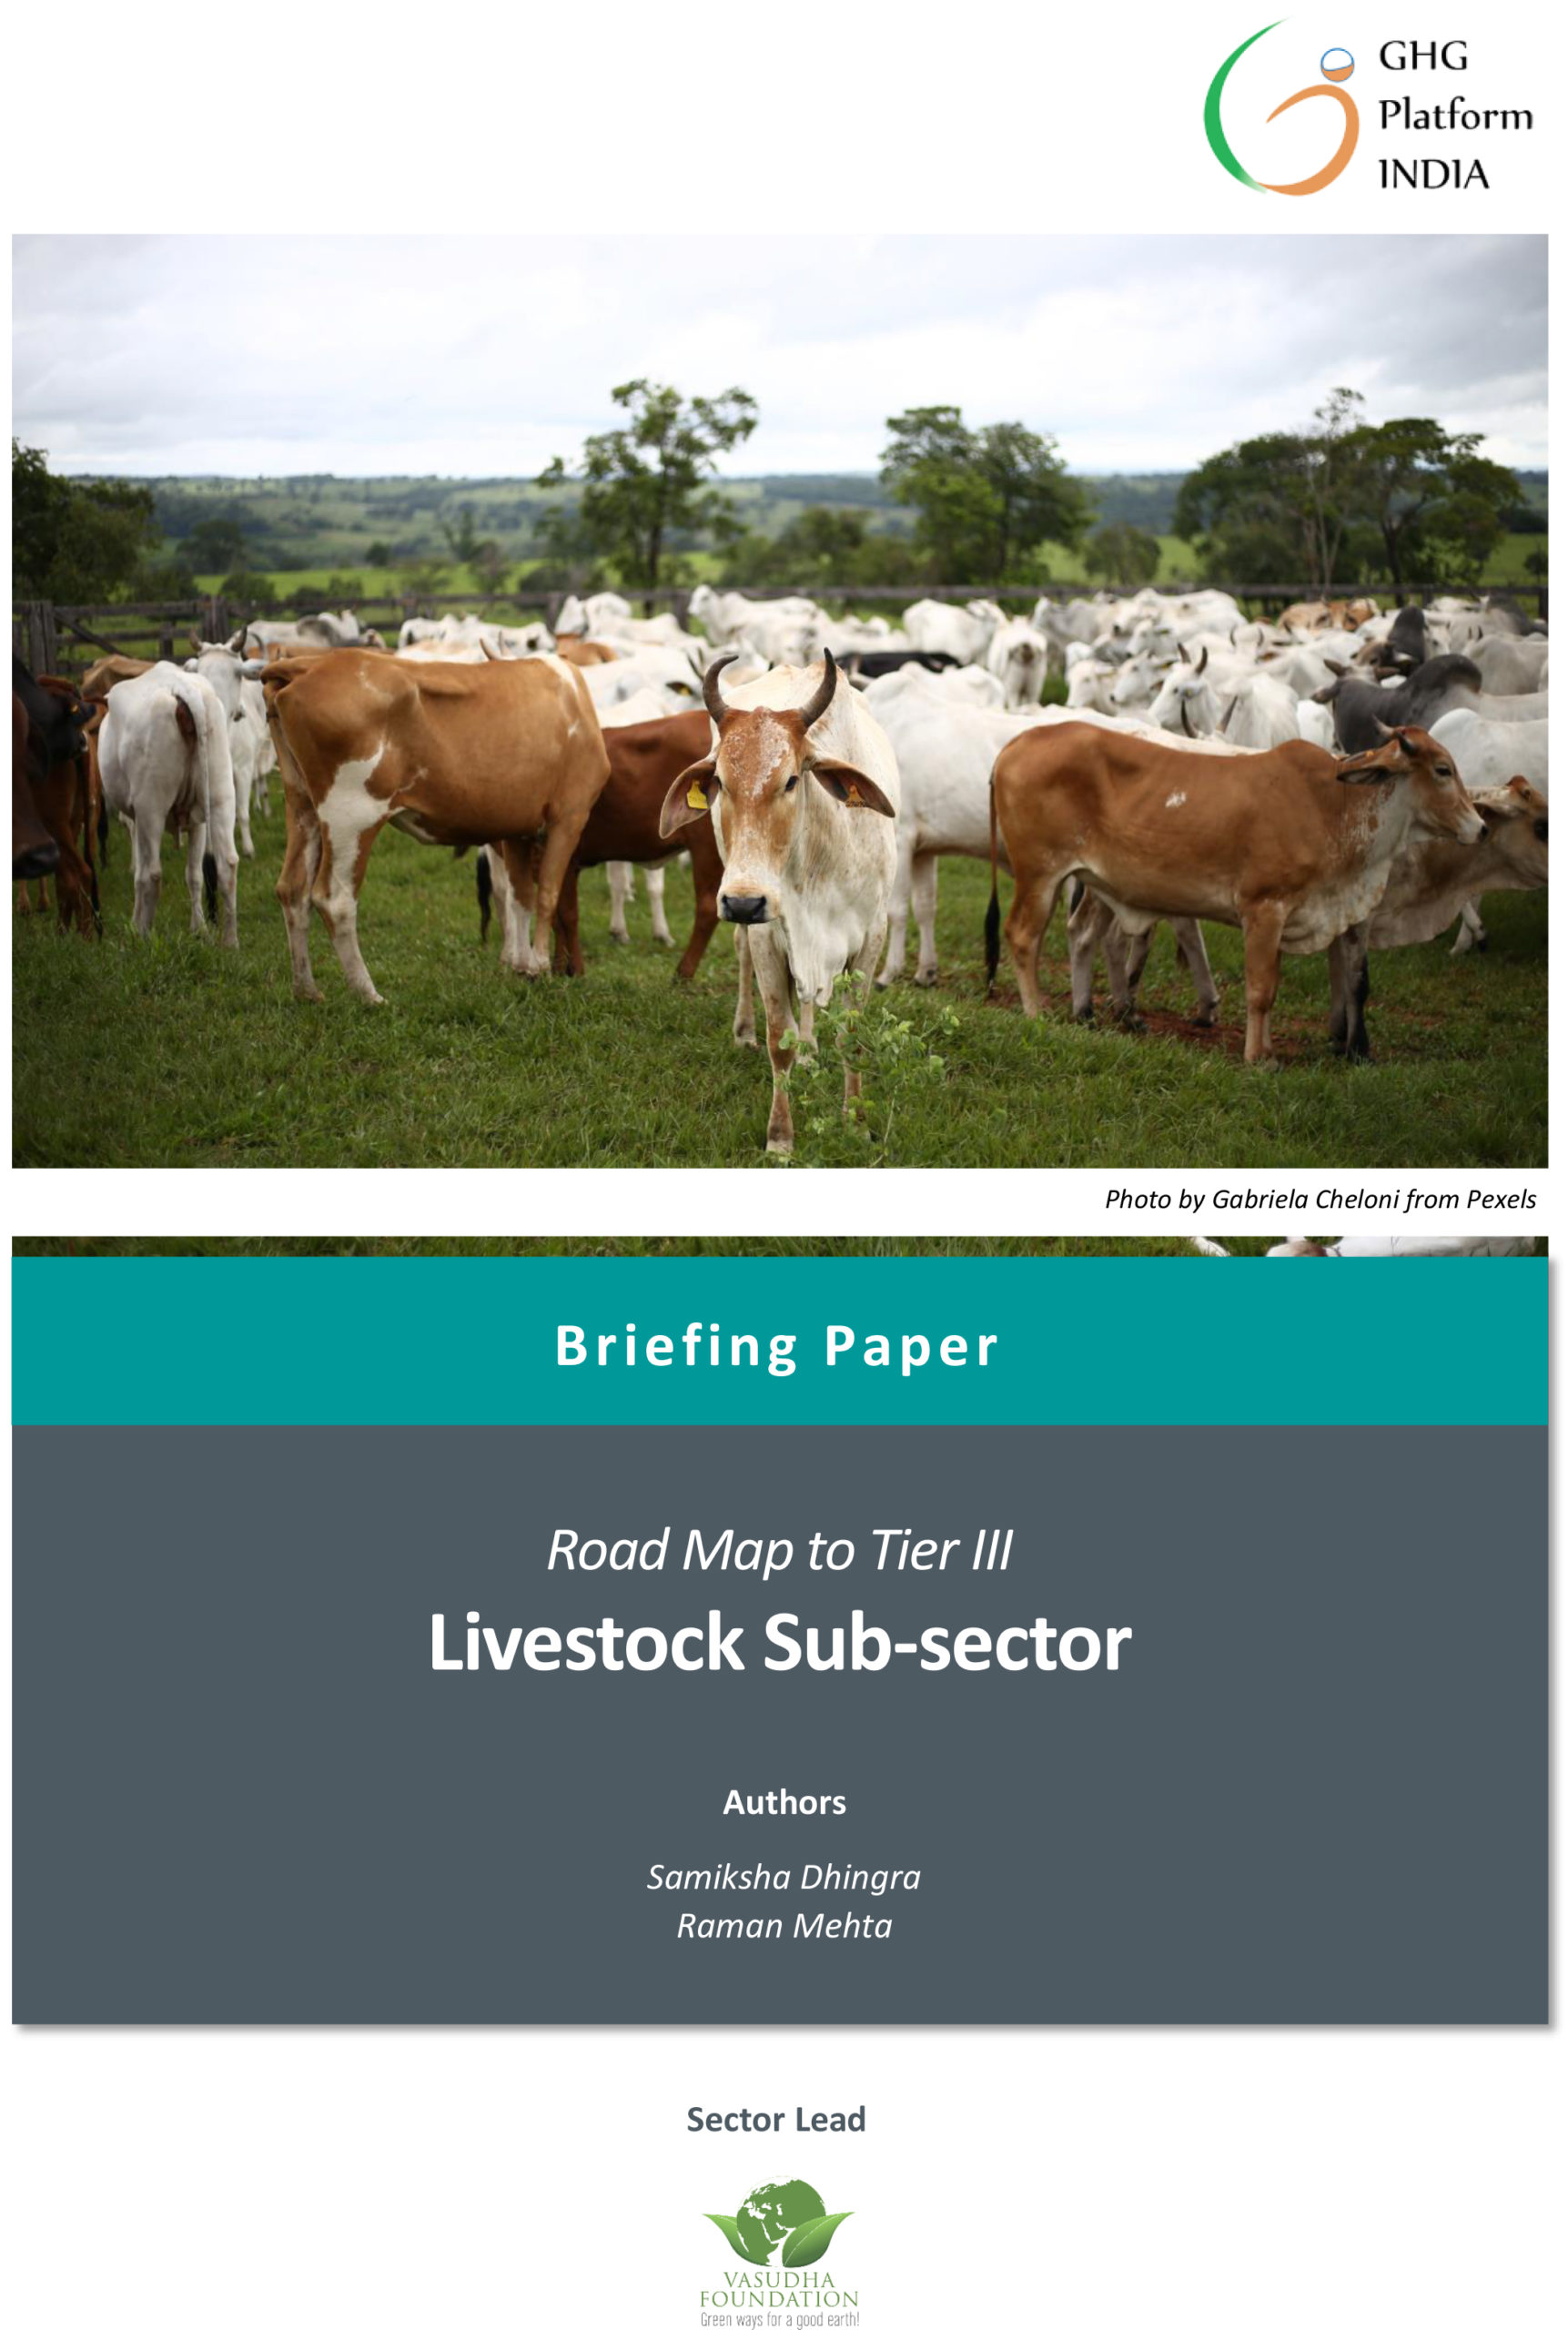 Road Map to Tier III_Livestock Sub-sector